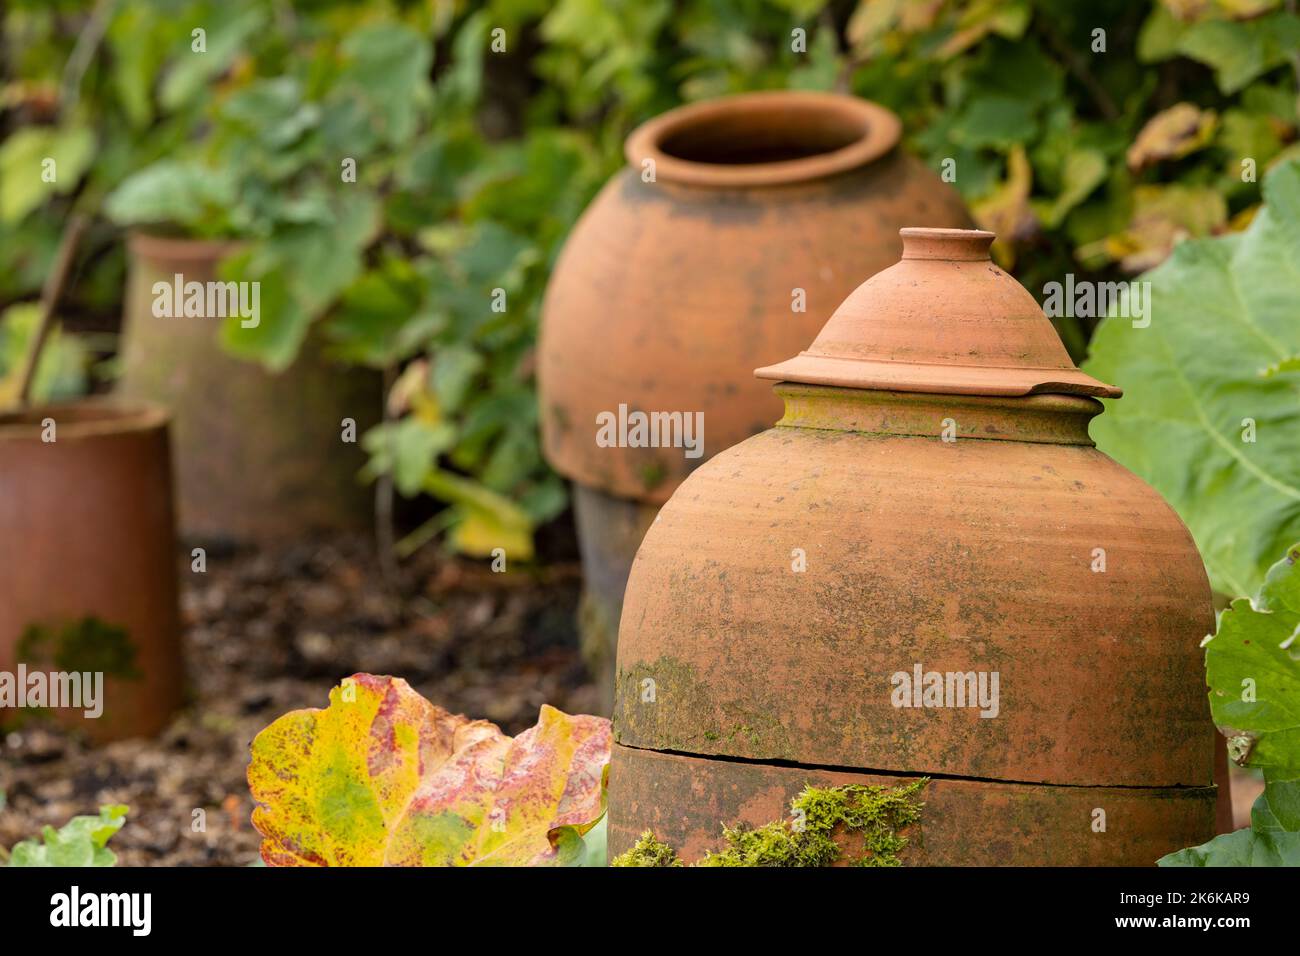 Traditional terracotta forcing jars in rhubarb vegetable garden Stock Photo